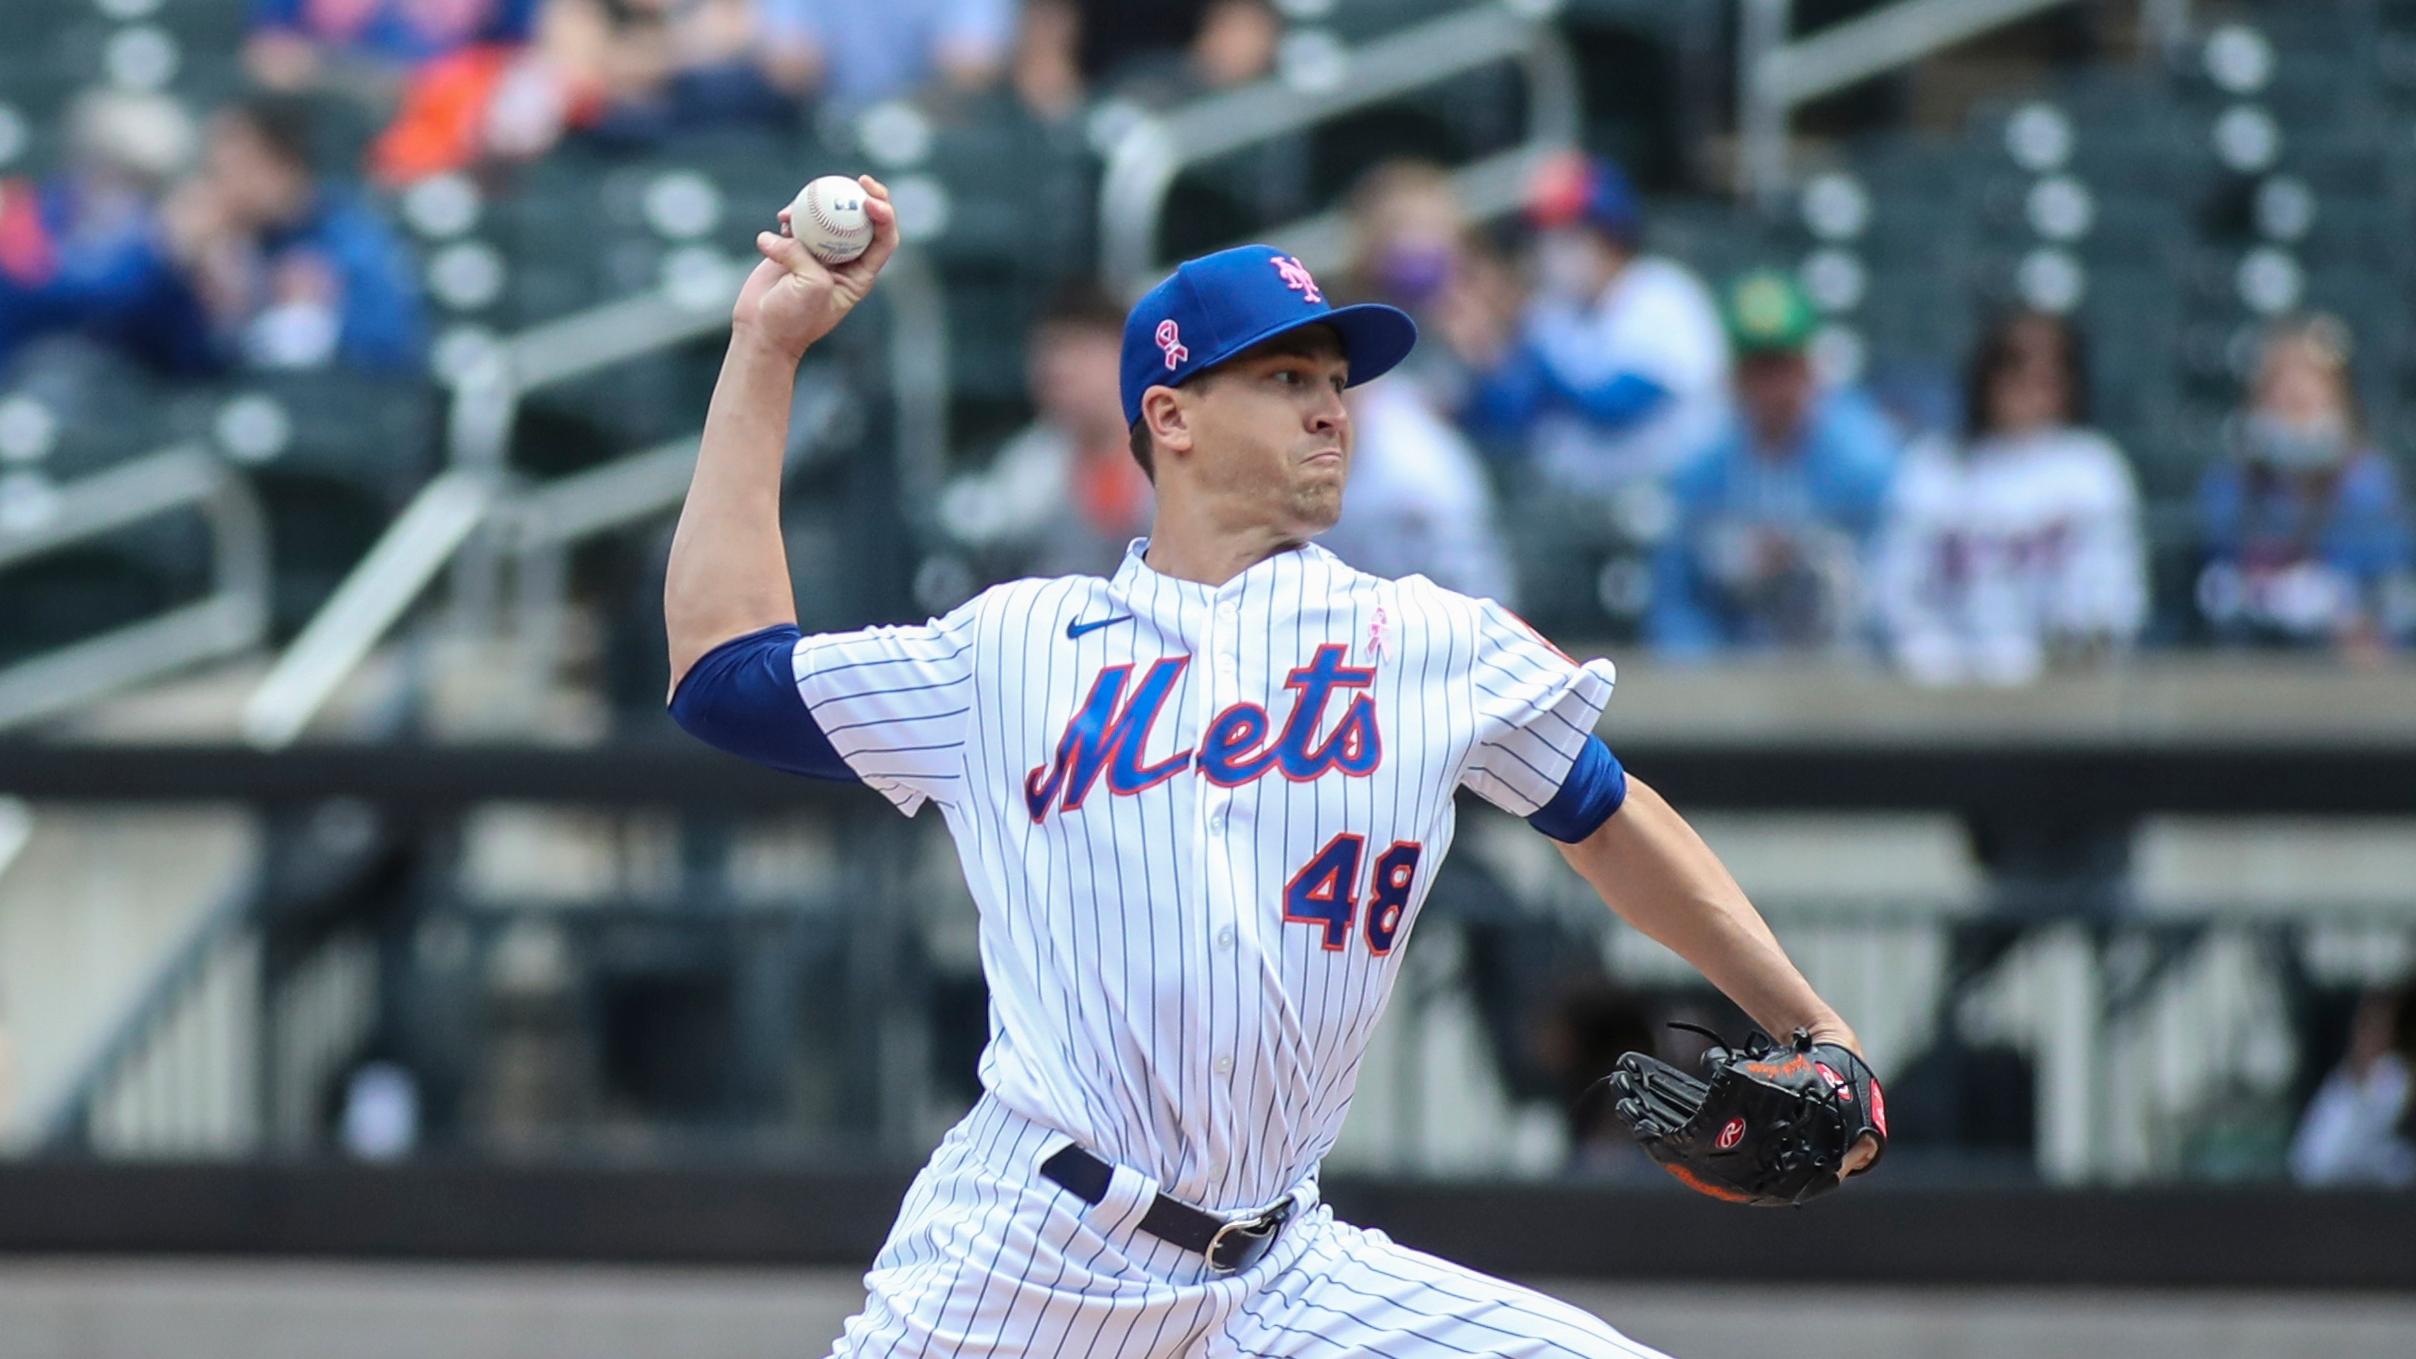 New York Mets pitcher Jacob deGrom (48) pitches in the first inning against the Arizona Diamondbacks at Citi Field. / Wendell Cruz-USA TODAY Sports